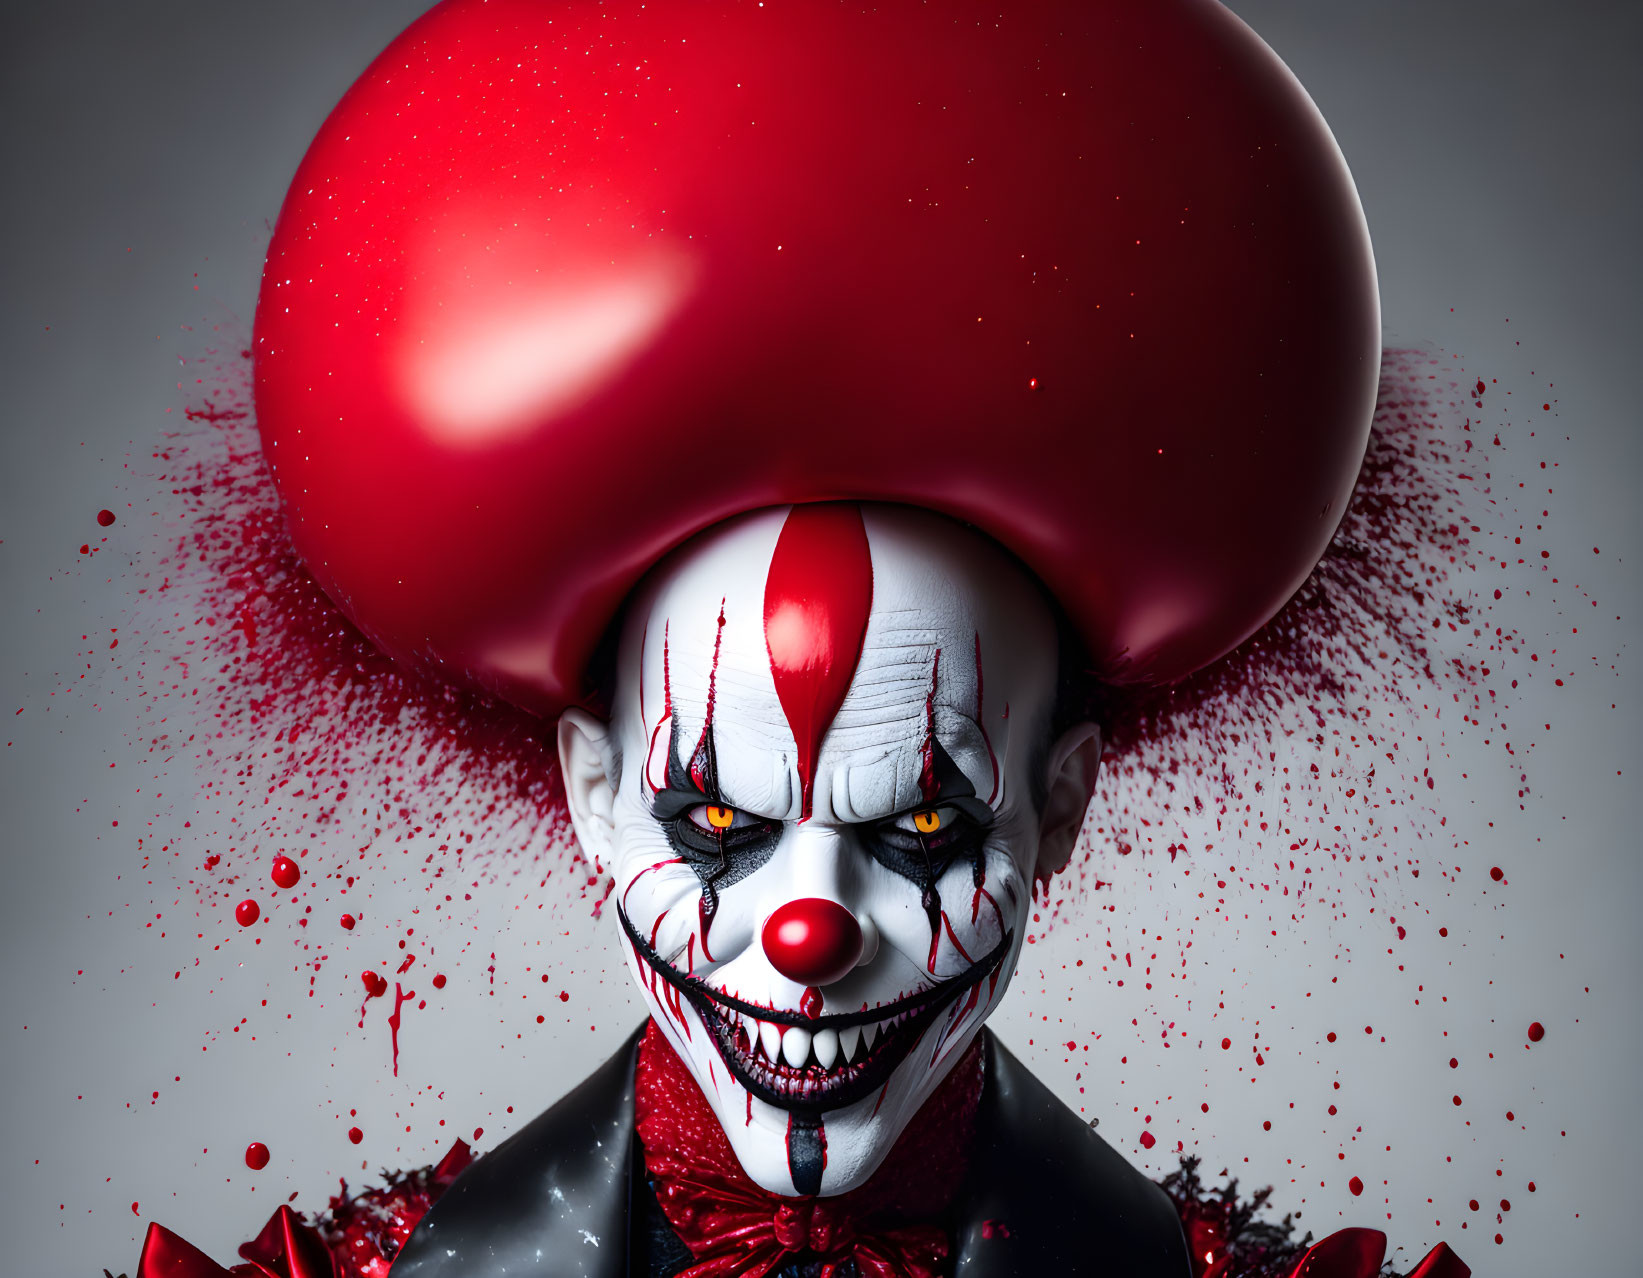 Menacing clown with red balloon hat and sharp teeth on grey background